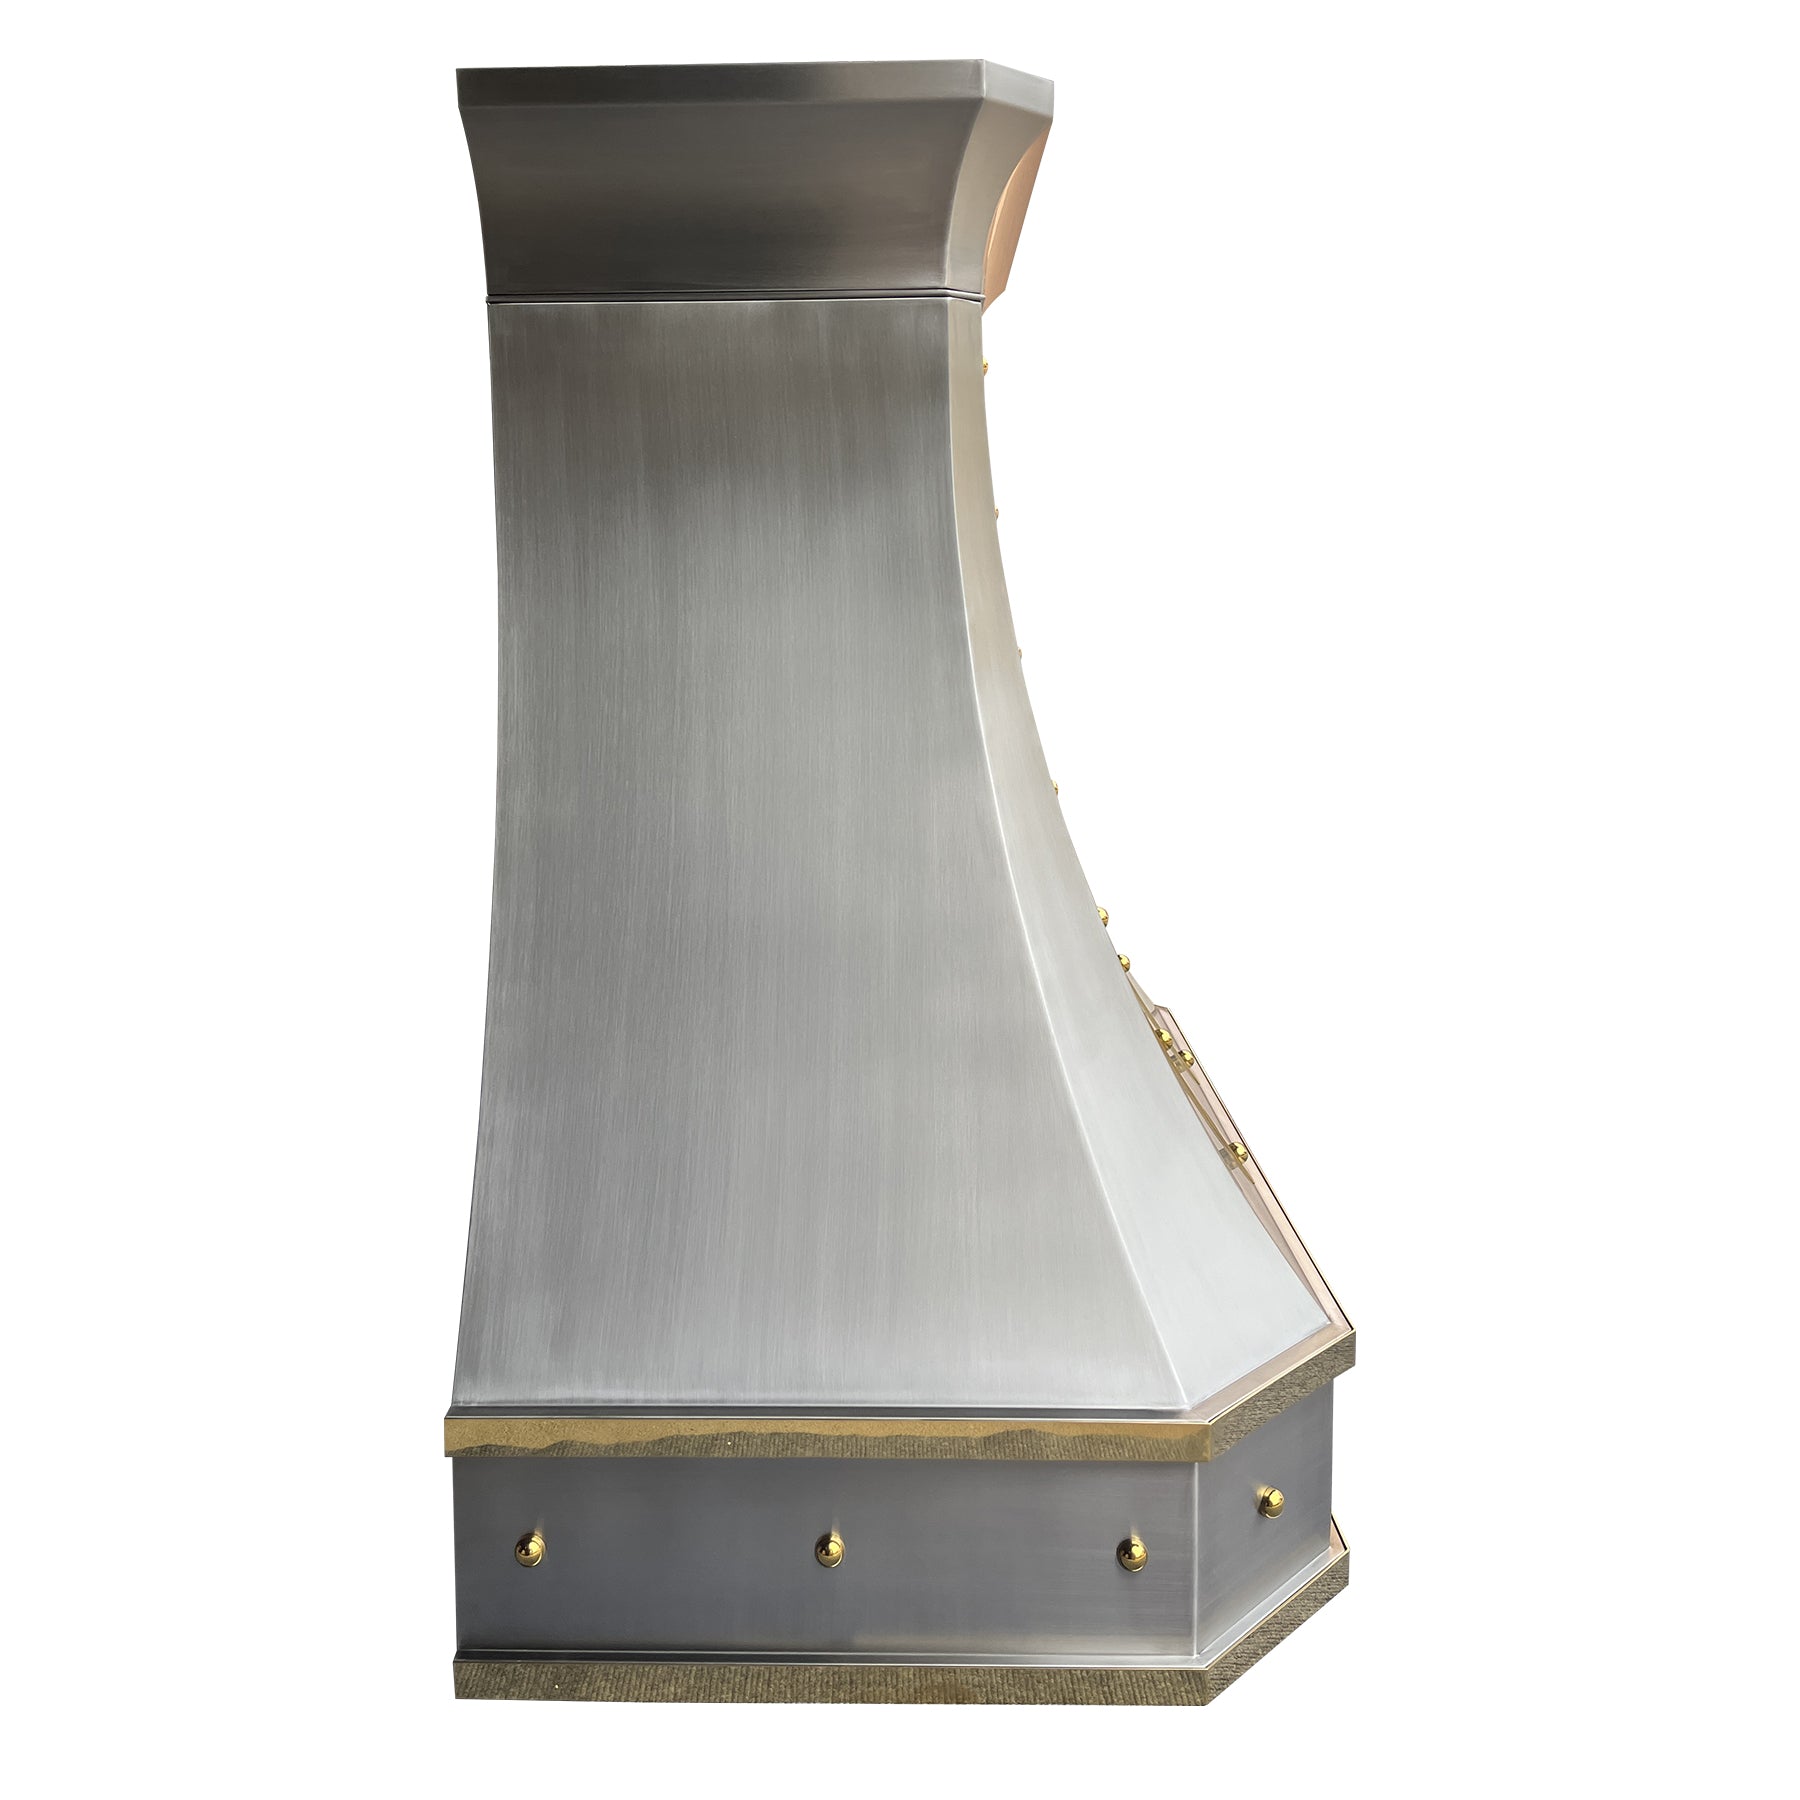 Fobest Custom  Brushed Stainless Steel Range Hood with polished brass straps and rivets -FSS-8  hood model - left view